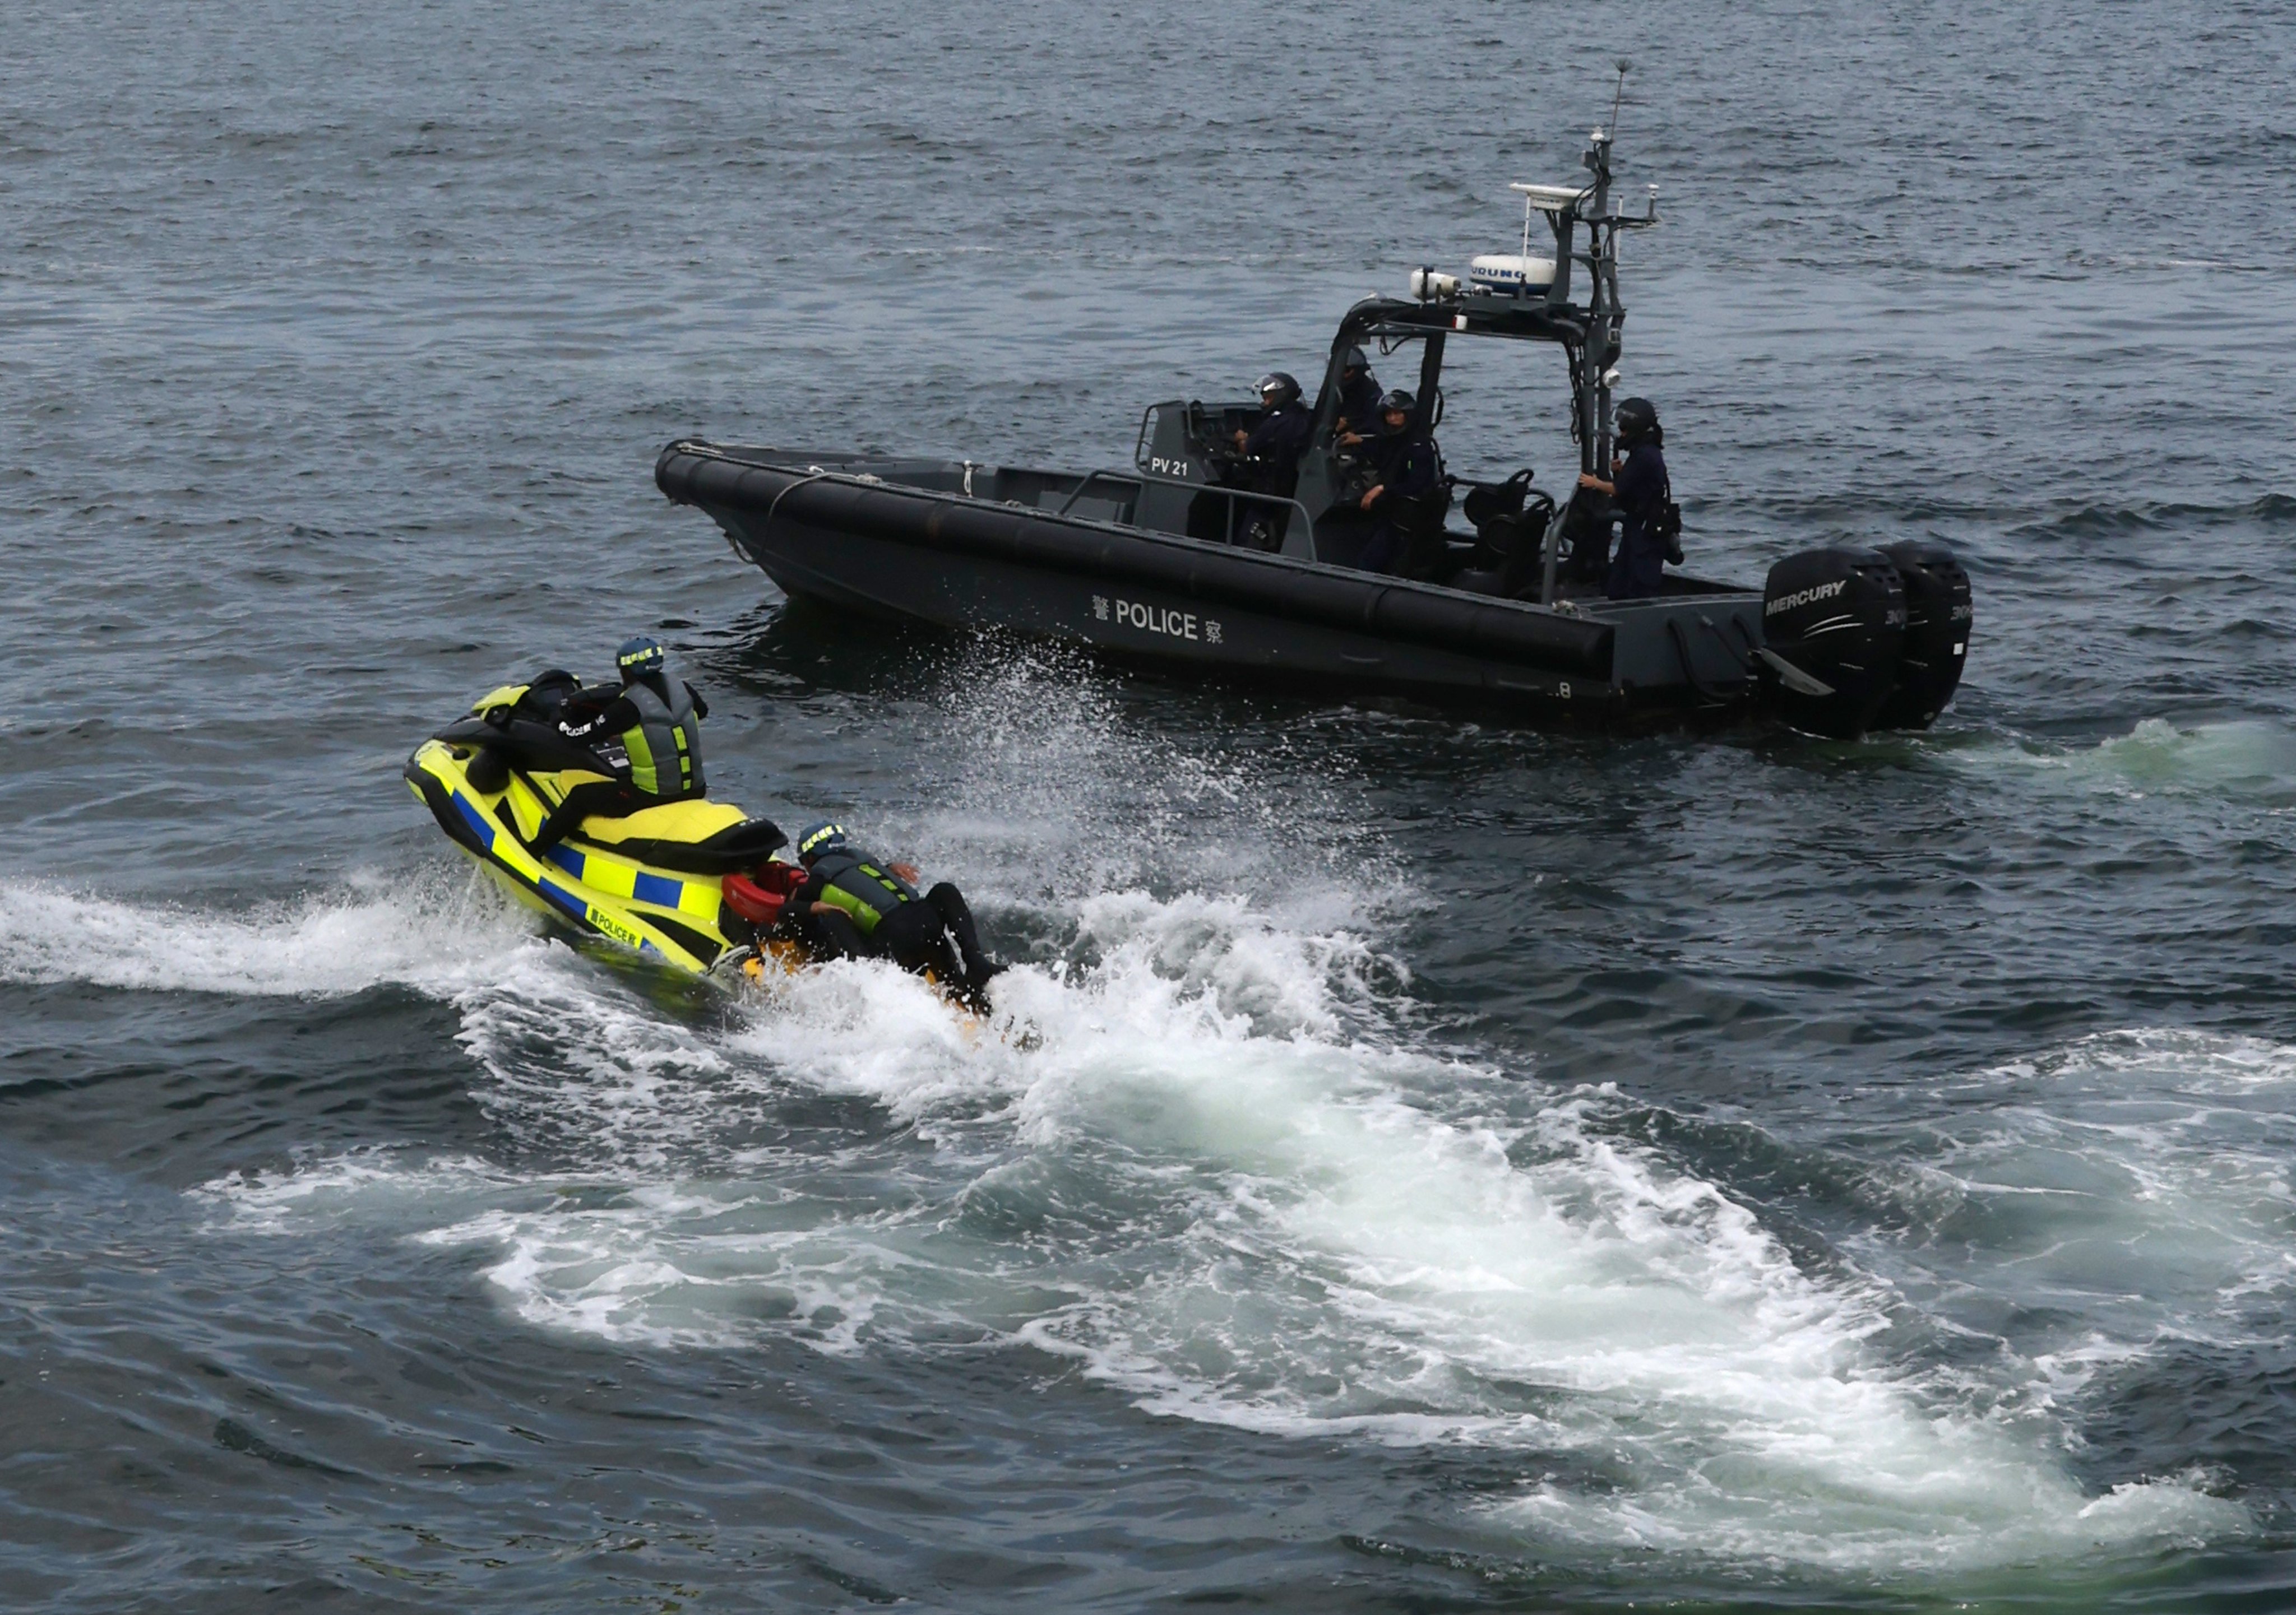 One of two jet skis under trial by police to boost close-to-shore and beach rescue capabilities. Photo: Yik Yeung-man